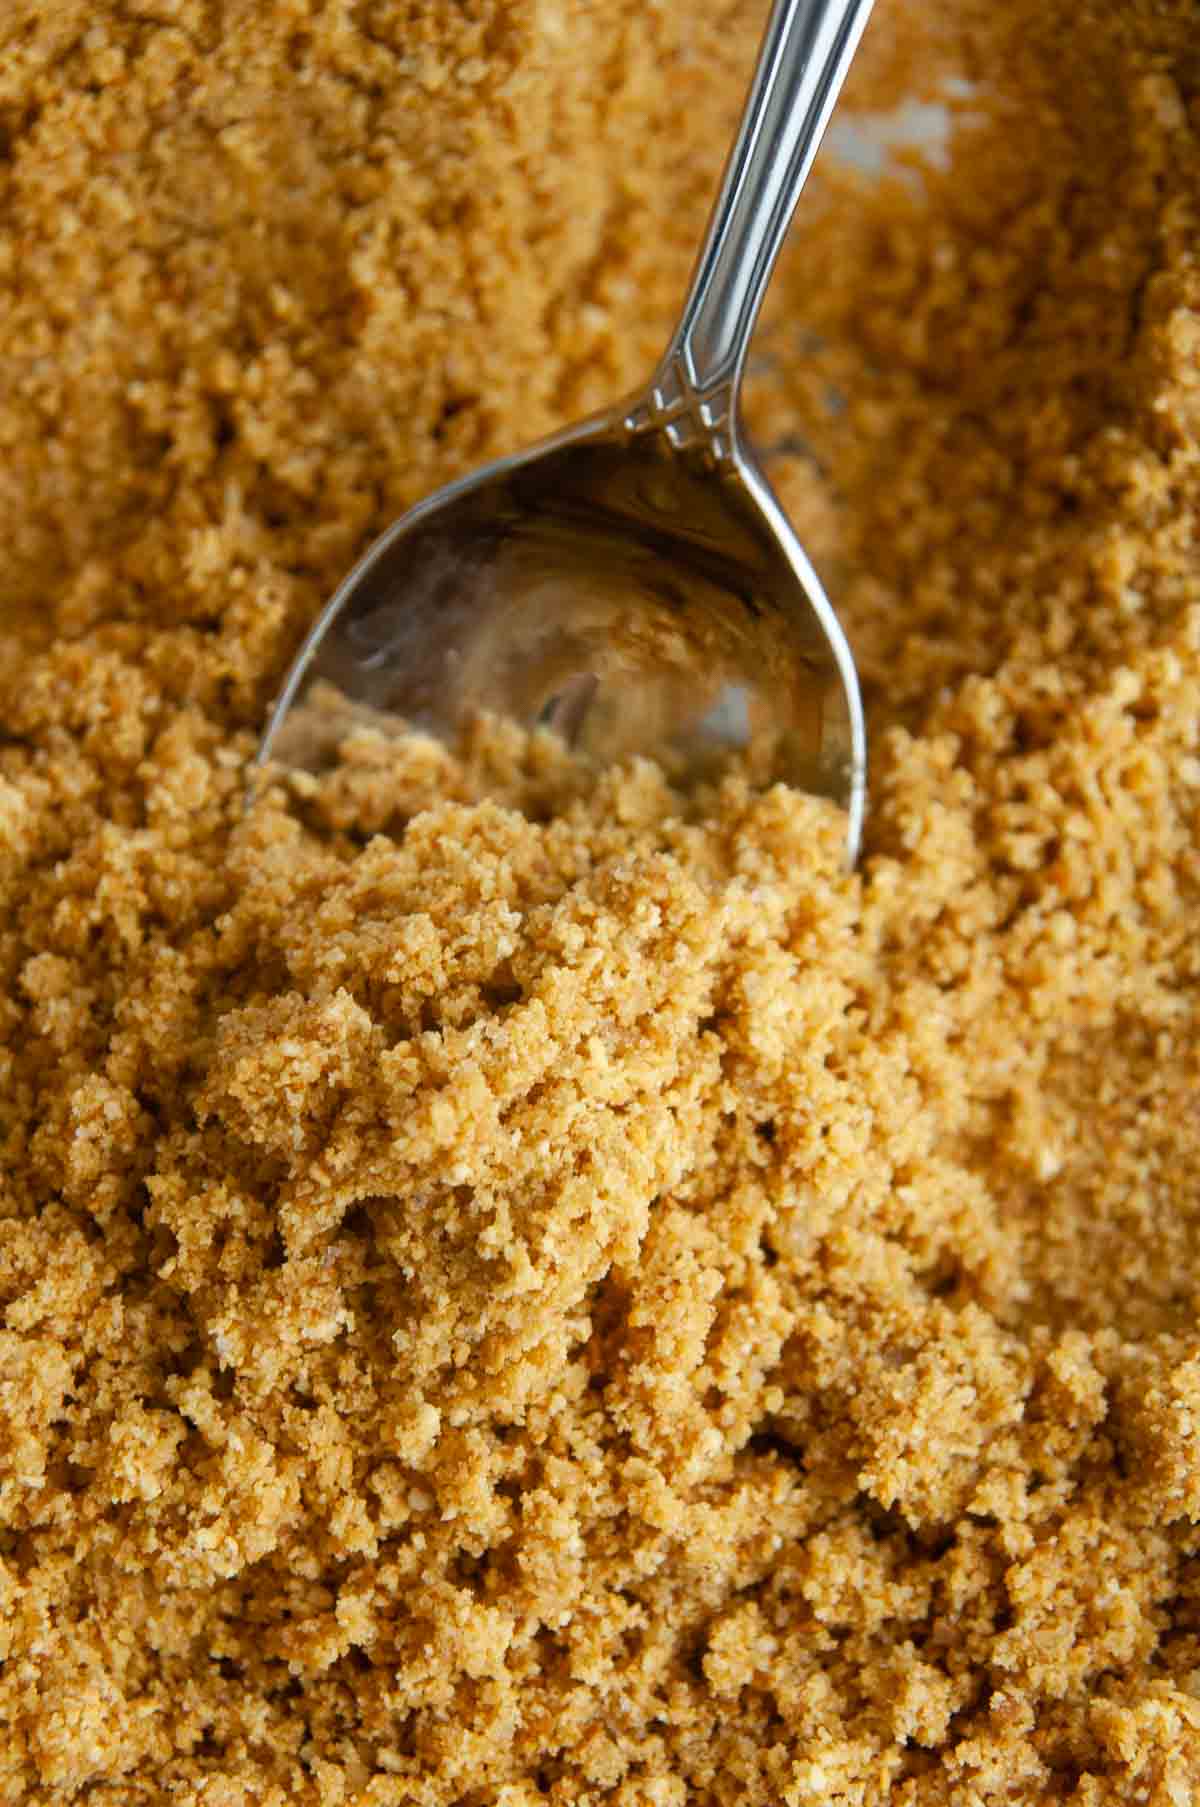 You want the graham cracker mixture to resemble the texture of coarse wet sand